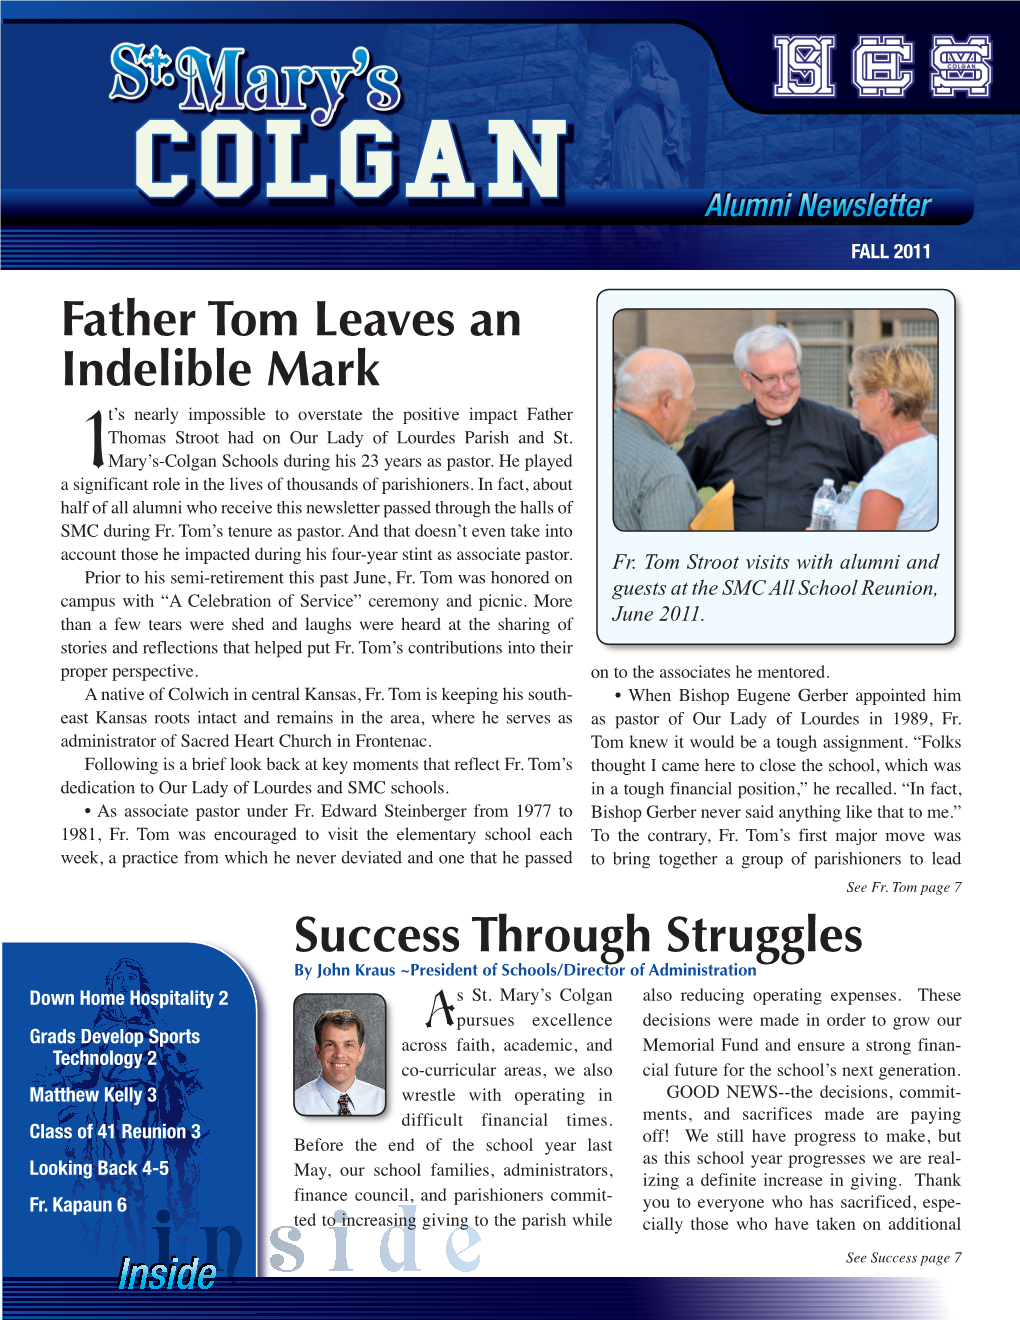 Father Tom Leaves an Indelible Mark Success Through Struggles